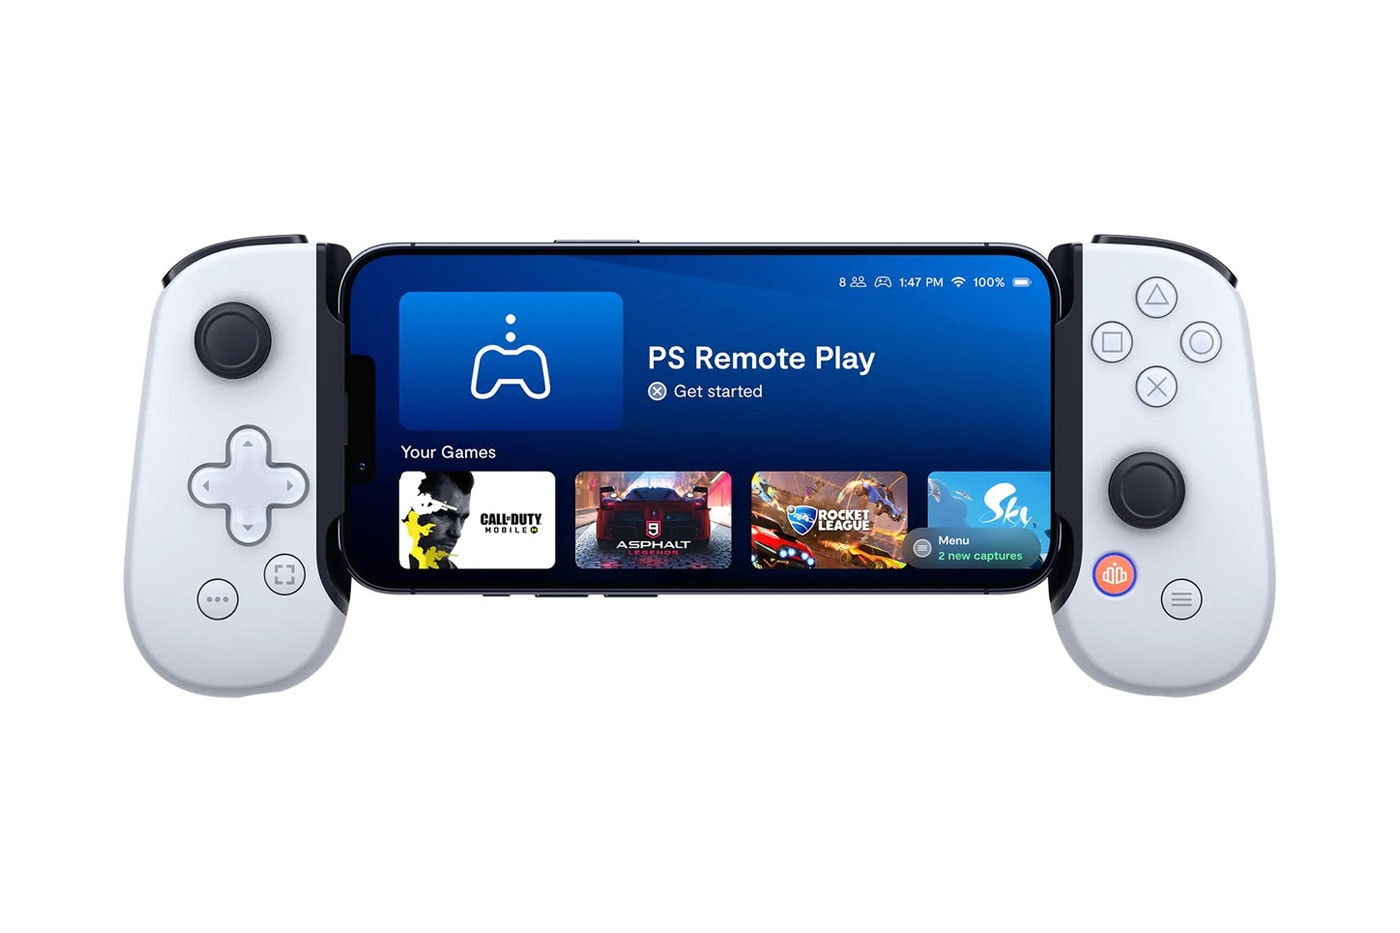 Backbone One Allows You to Play PlayStation Games on iPhone